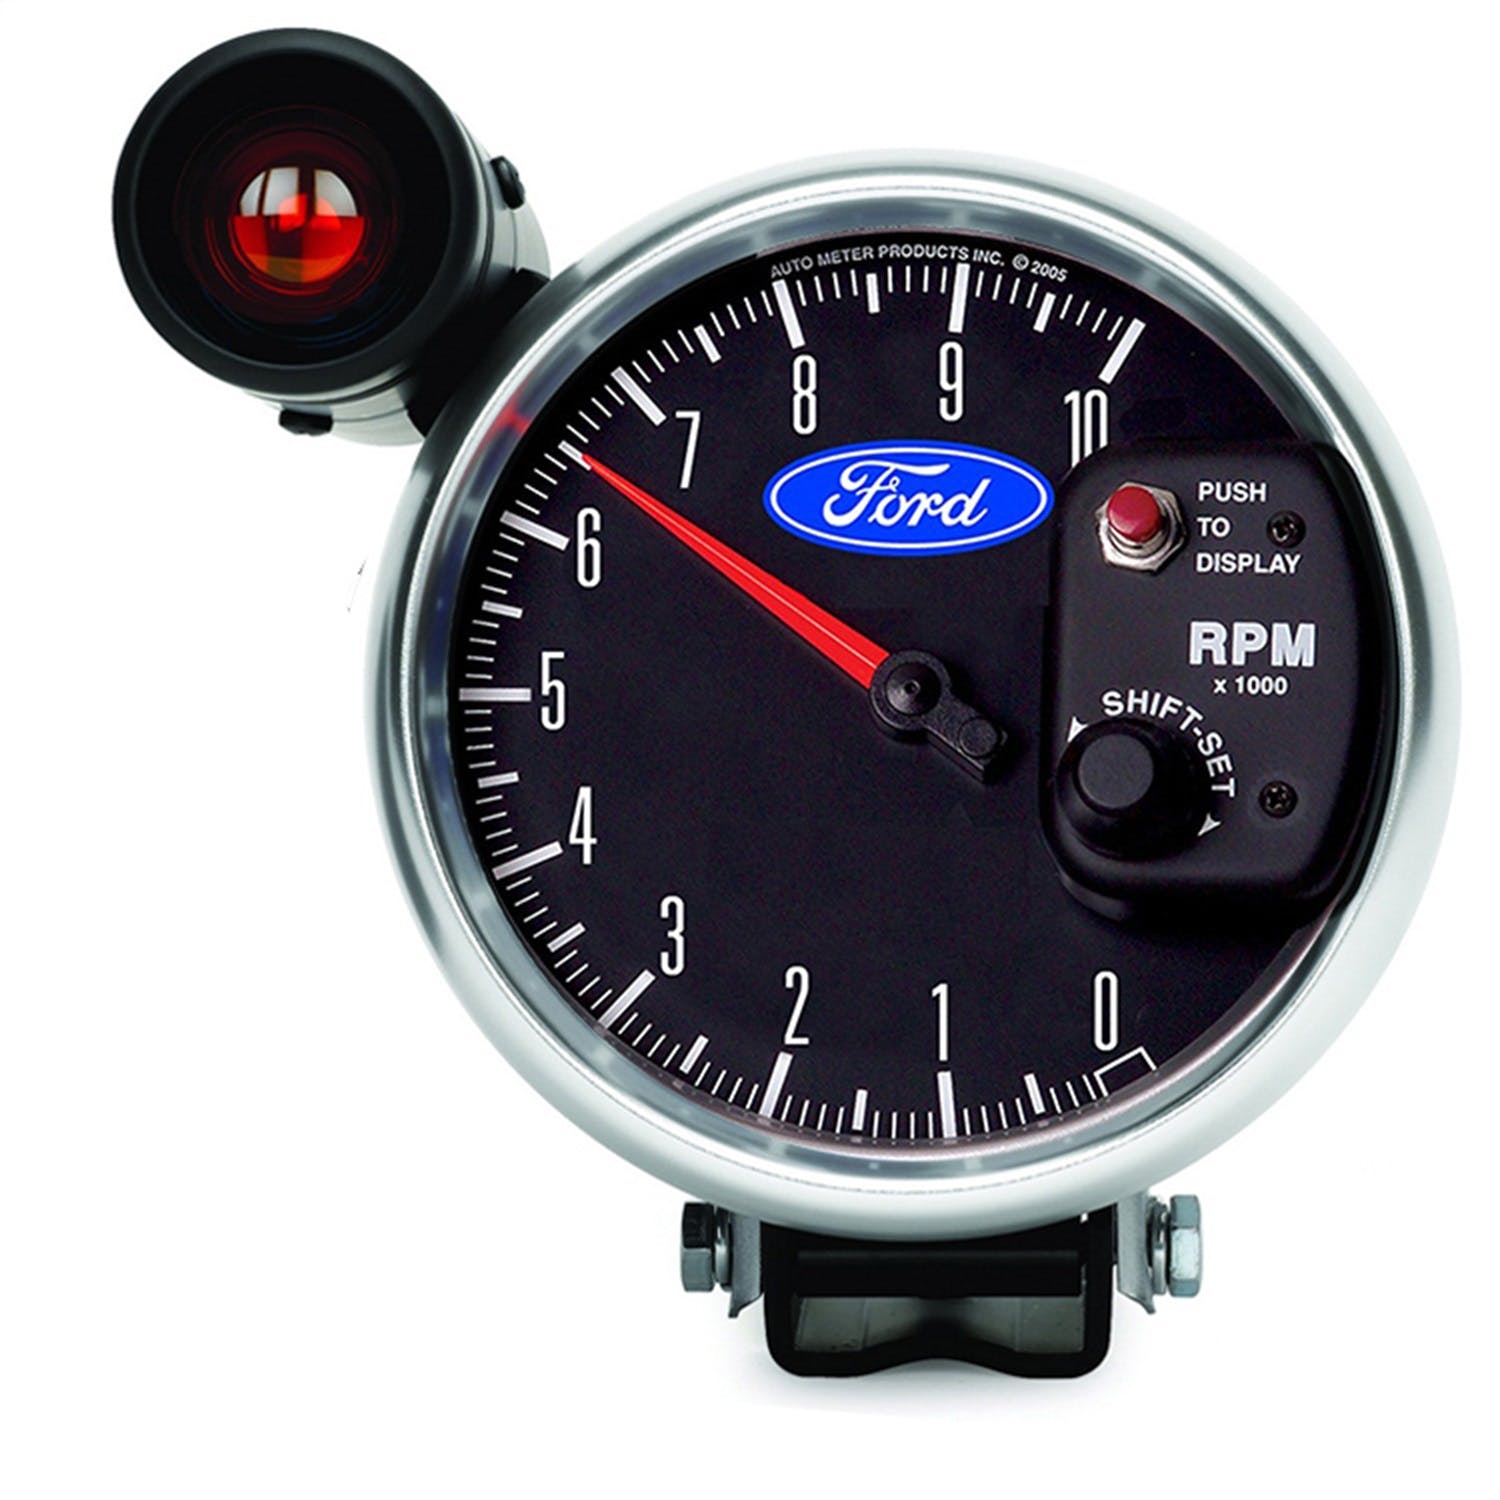 AutoMeter Products 880827 Tachometer Gauge, 5, 10K RPM, Pedestal, with Ext. Shift-Lite, Ford